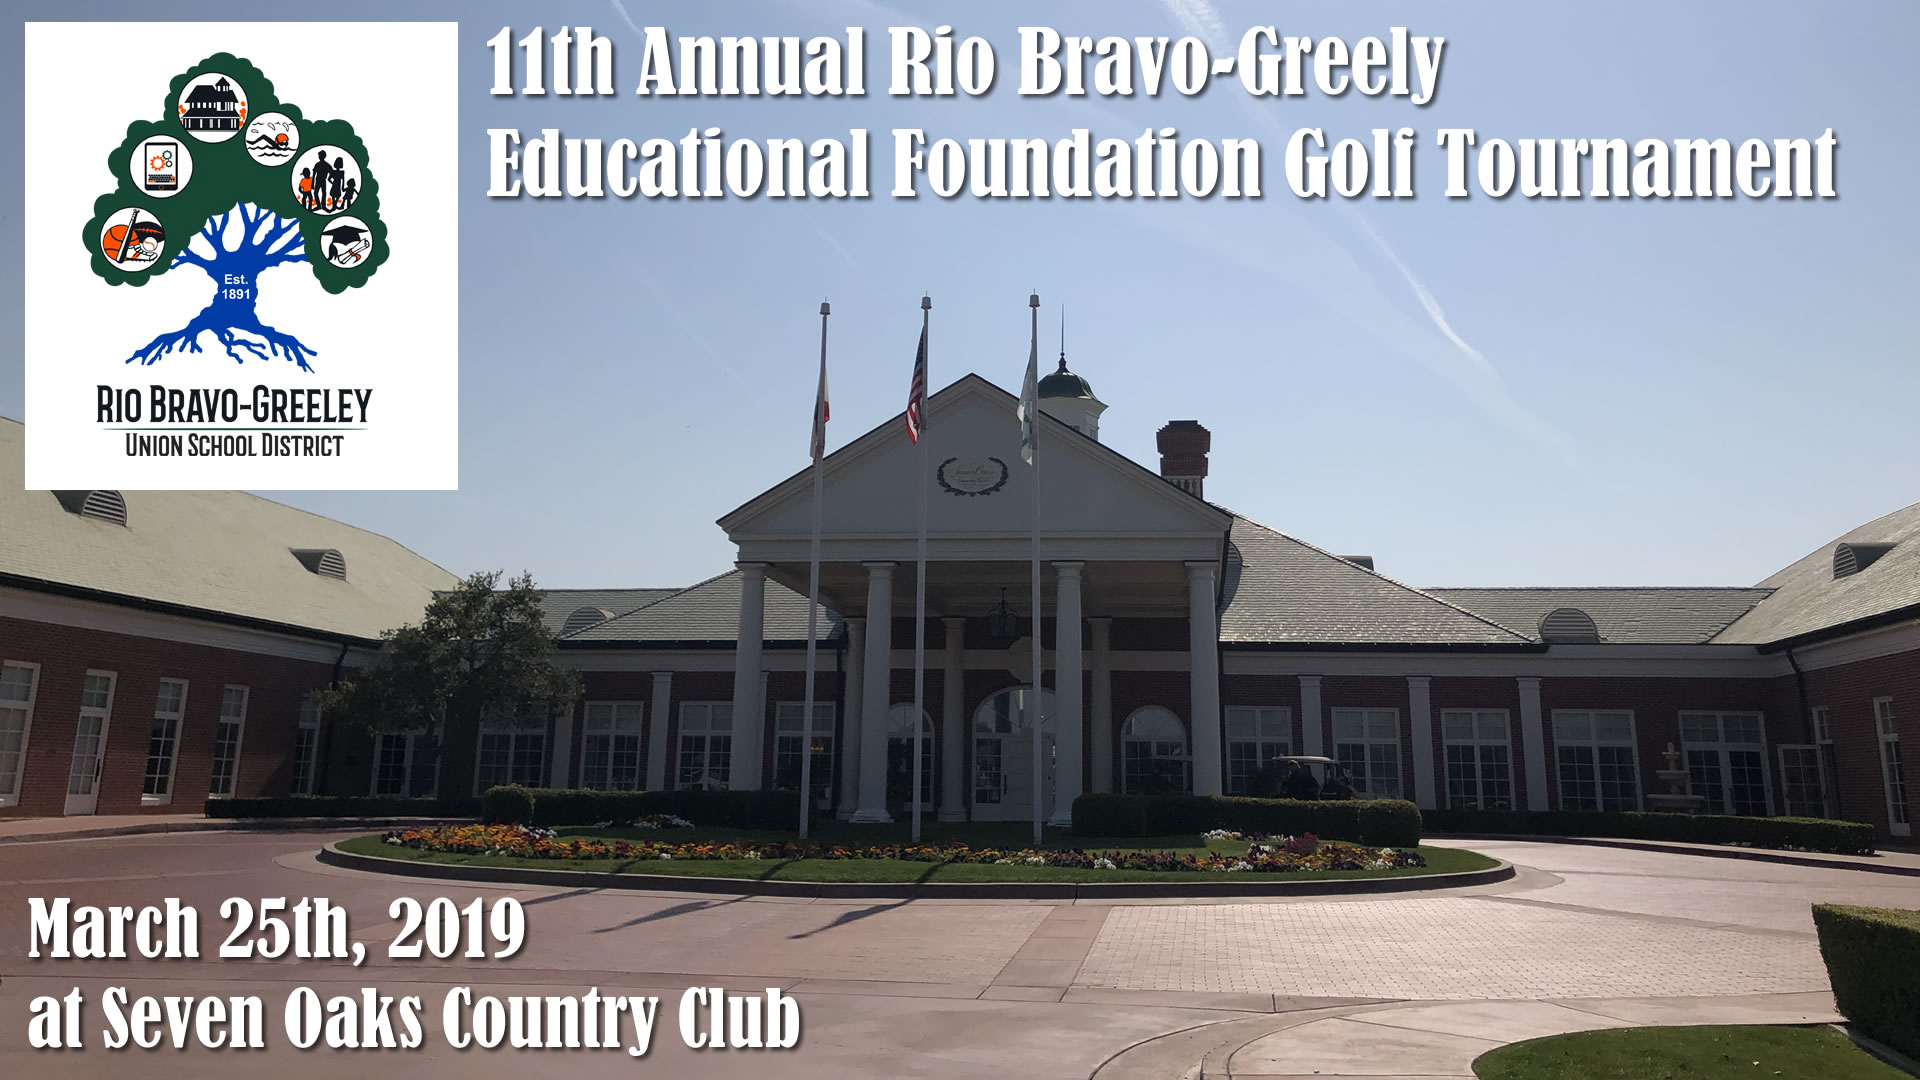 Results 11th Annual Rio Bravo Greely Educational